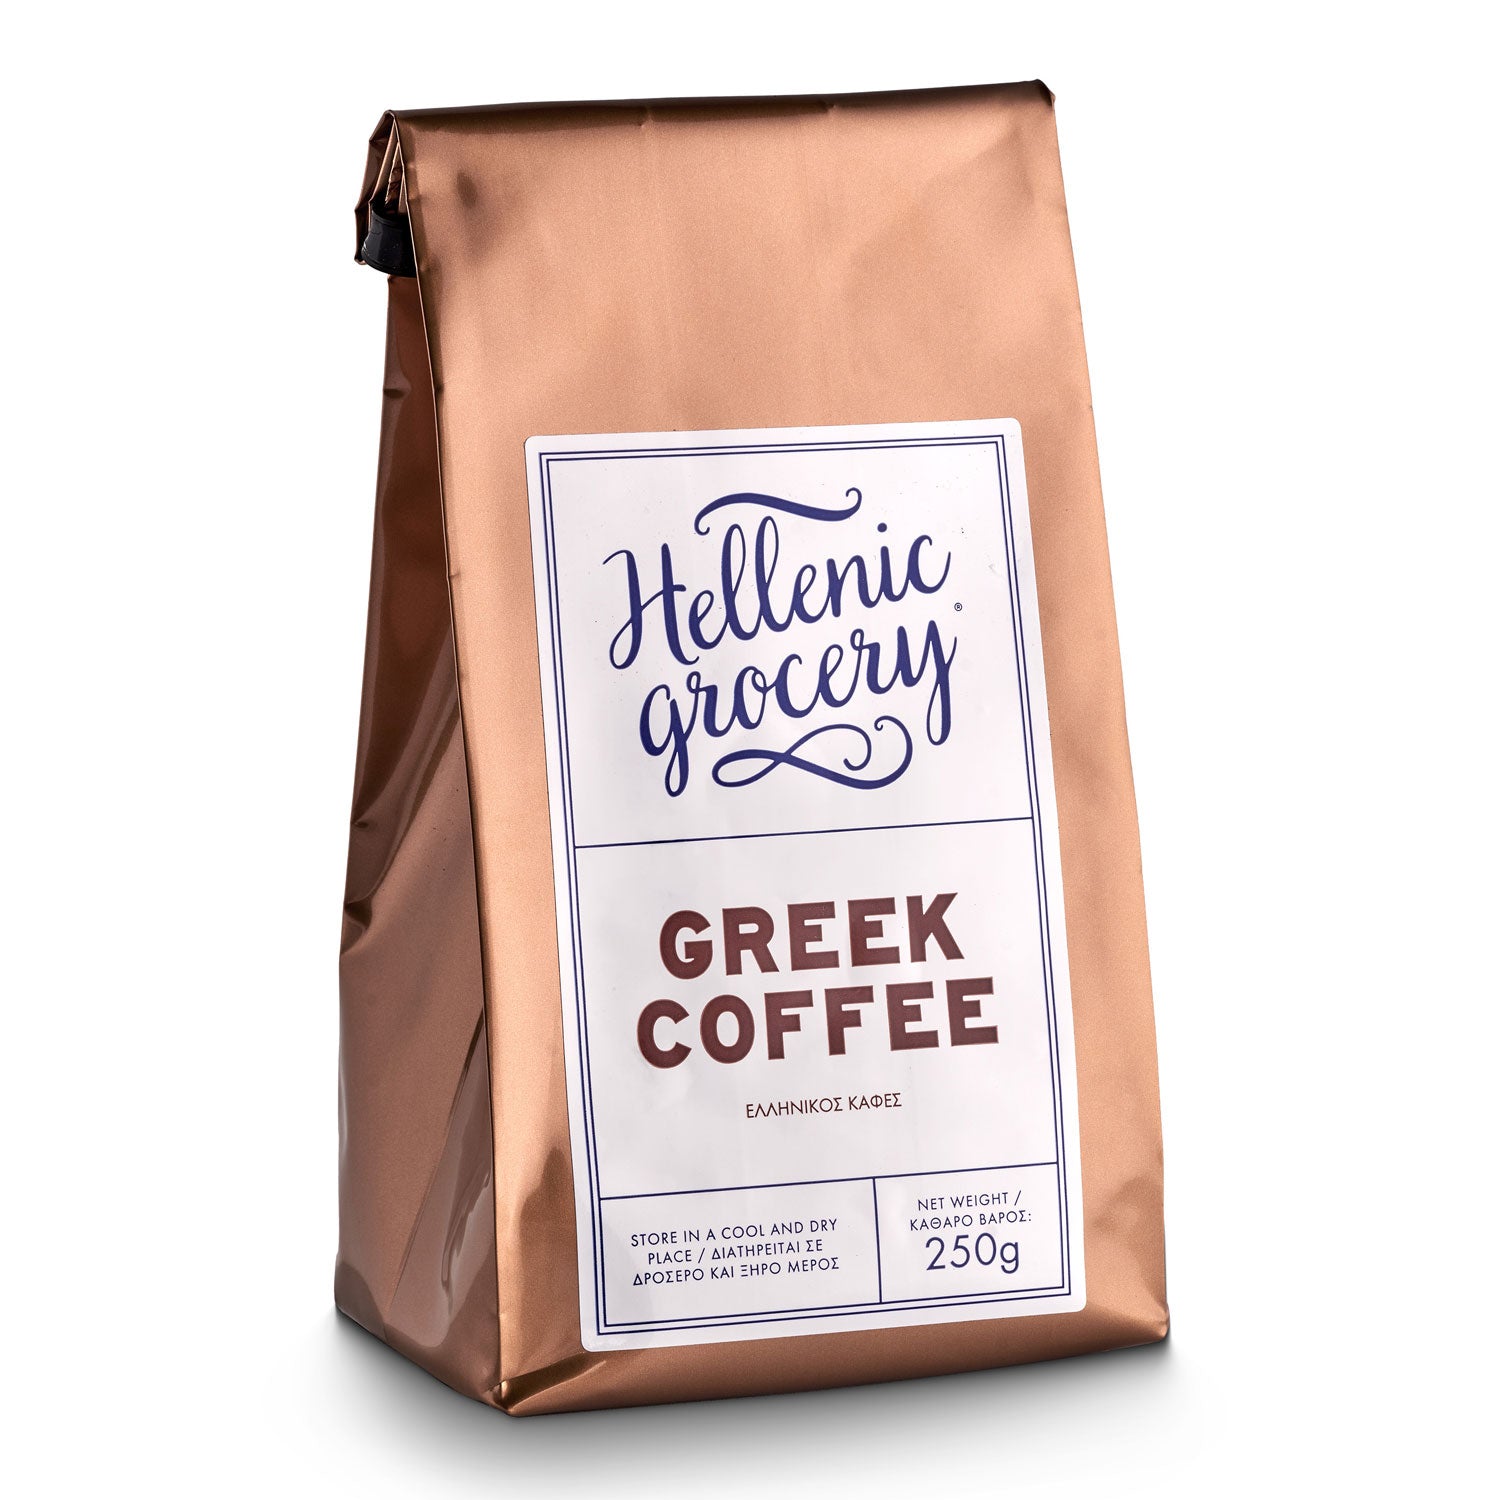 Café grec traditionnel - 250g - Hellenic Grocery